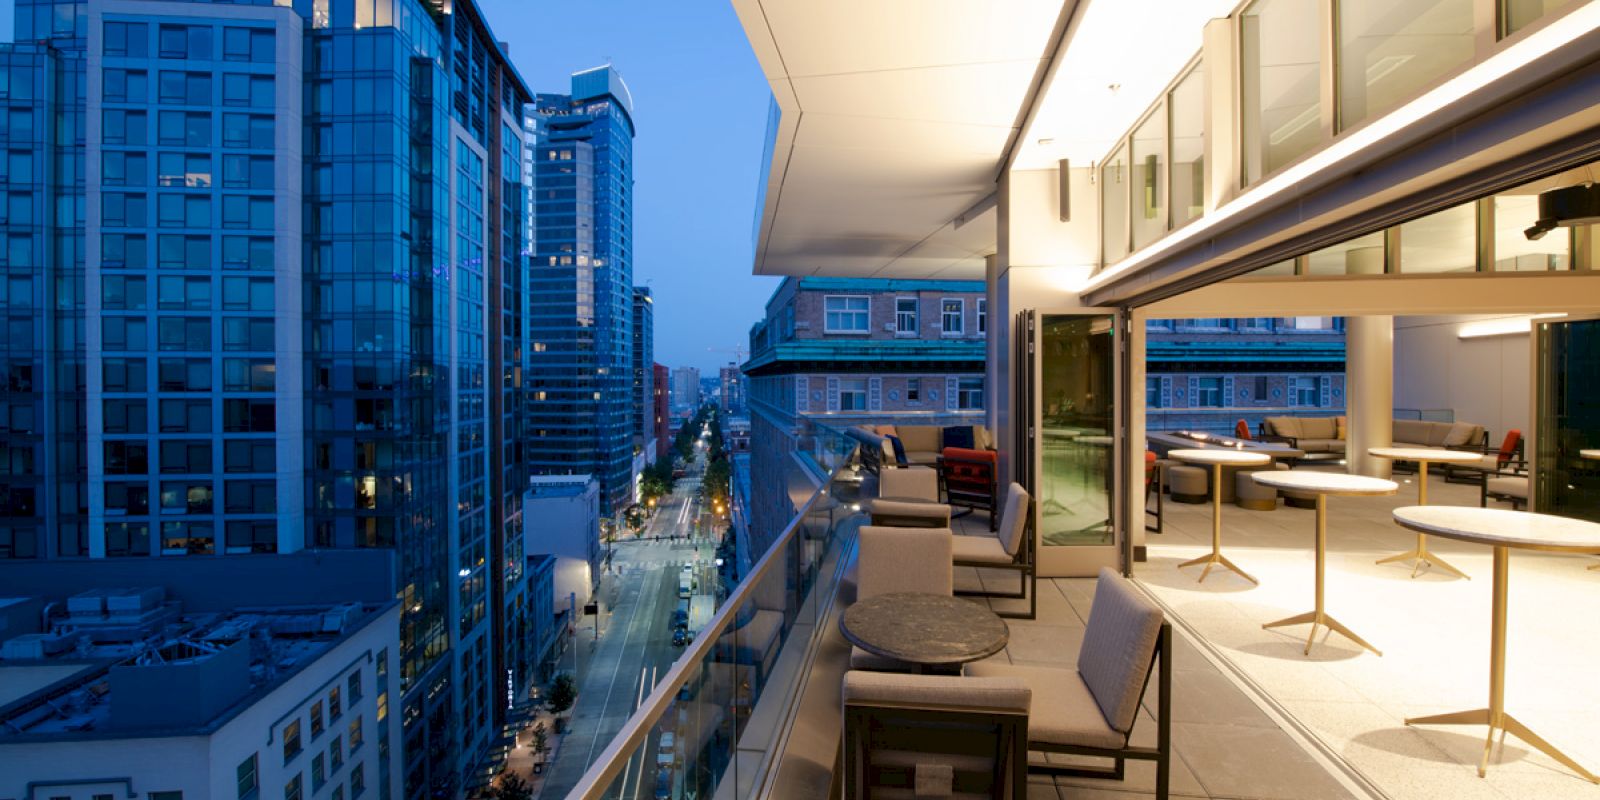 A modern urban balcony at dusk features comfortable seating and tables, overlooking a cityscape with high-rise buildings and a well-lit street.